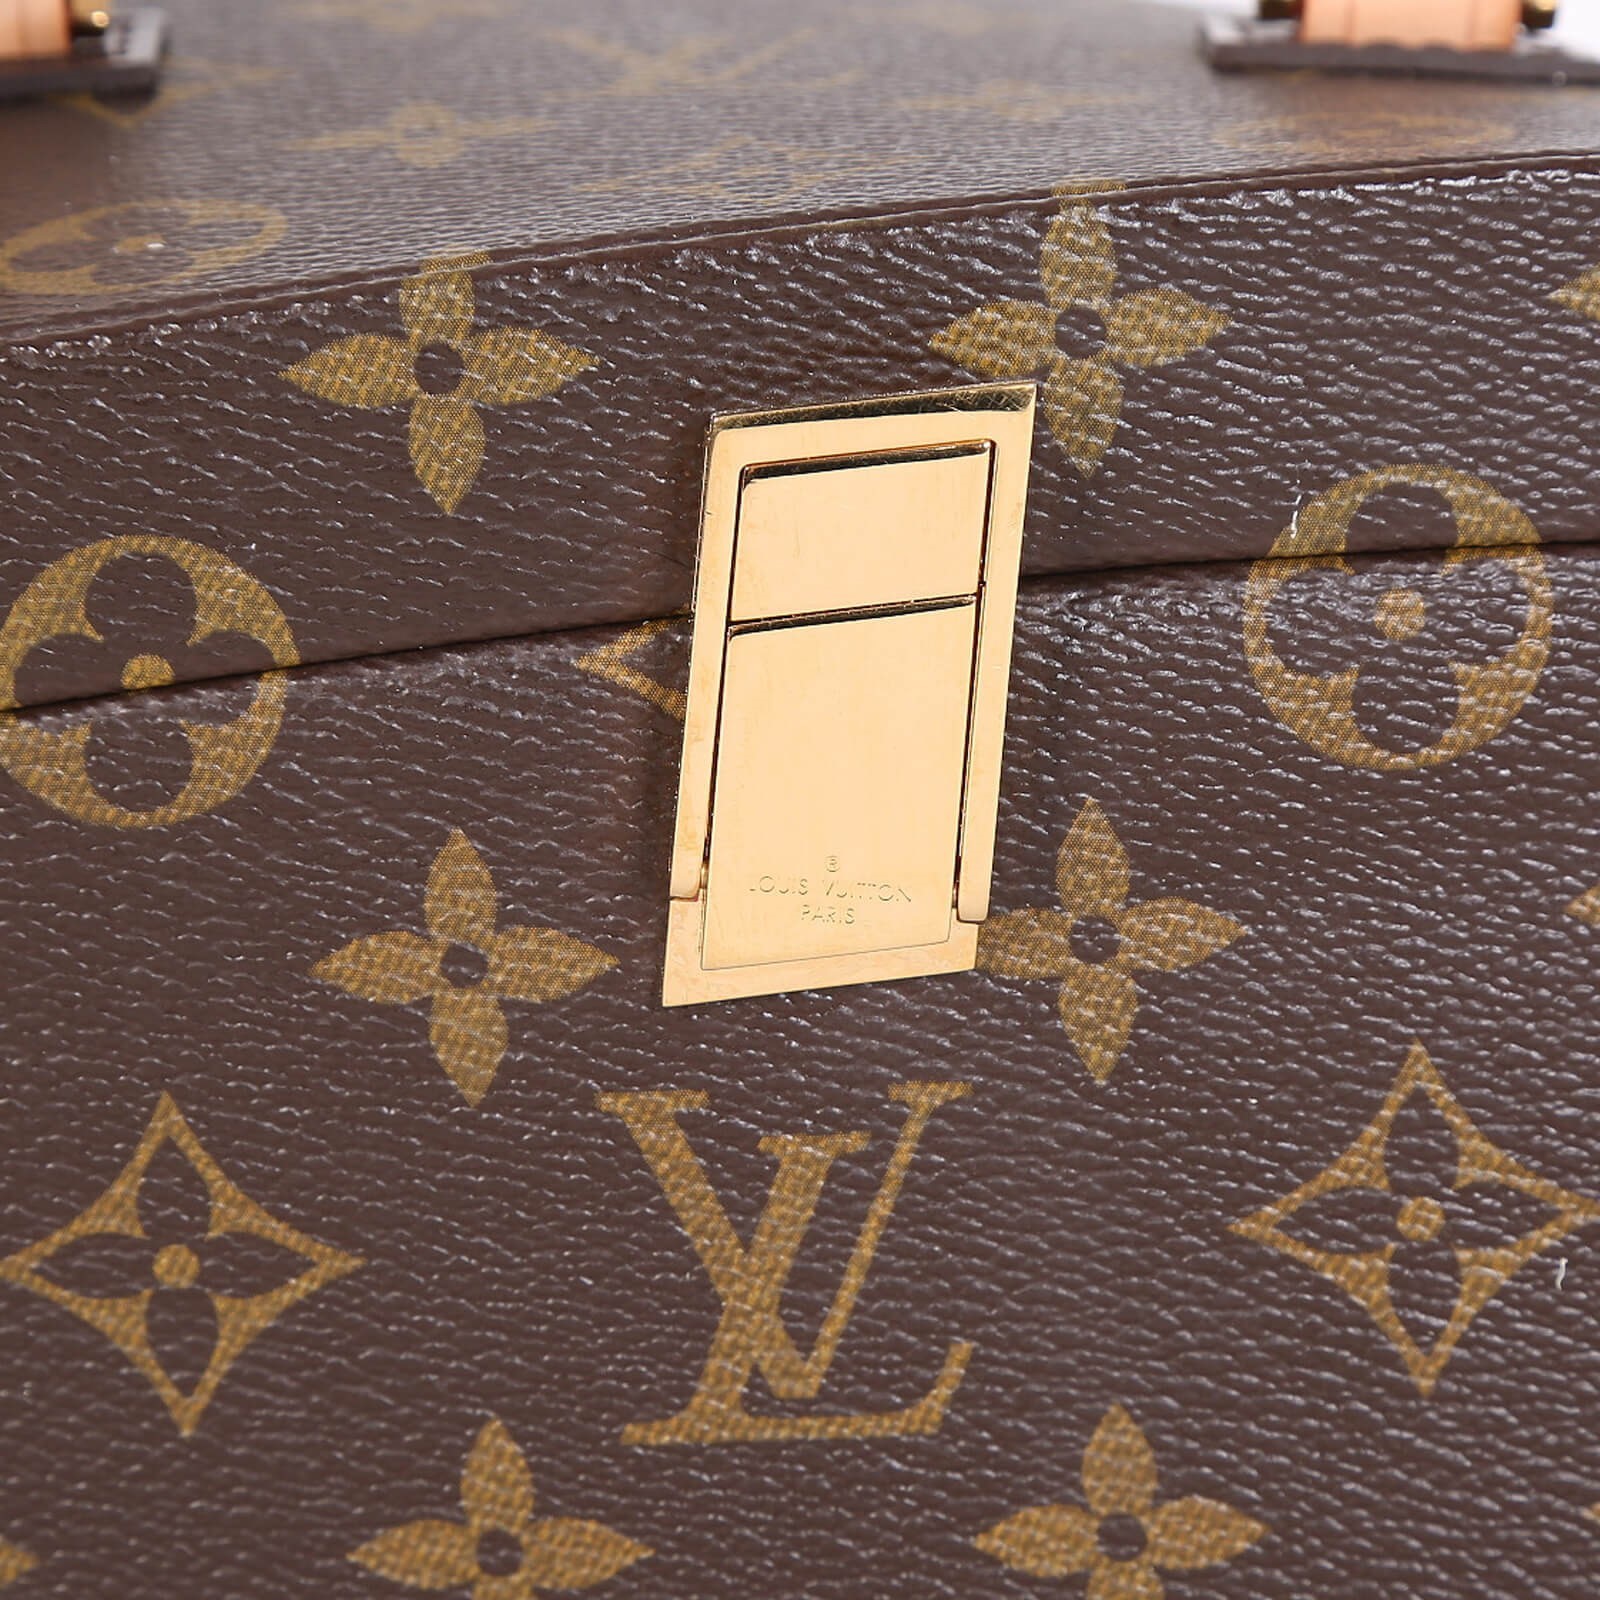 Louis Vuitton * 2014 x Frank Gehry Twisted Box Monogram M40275